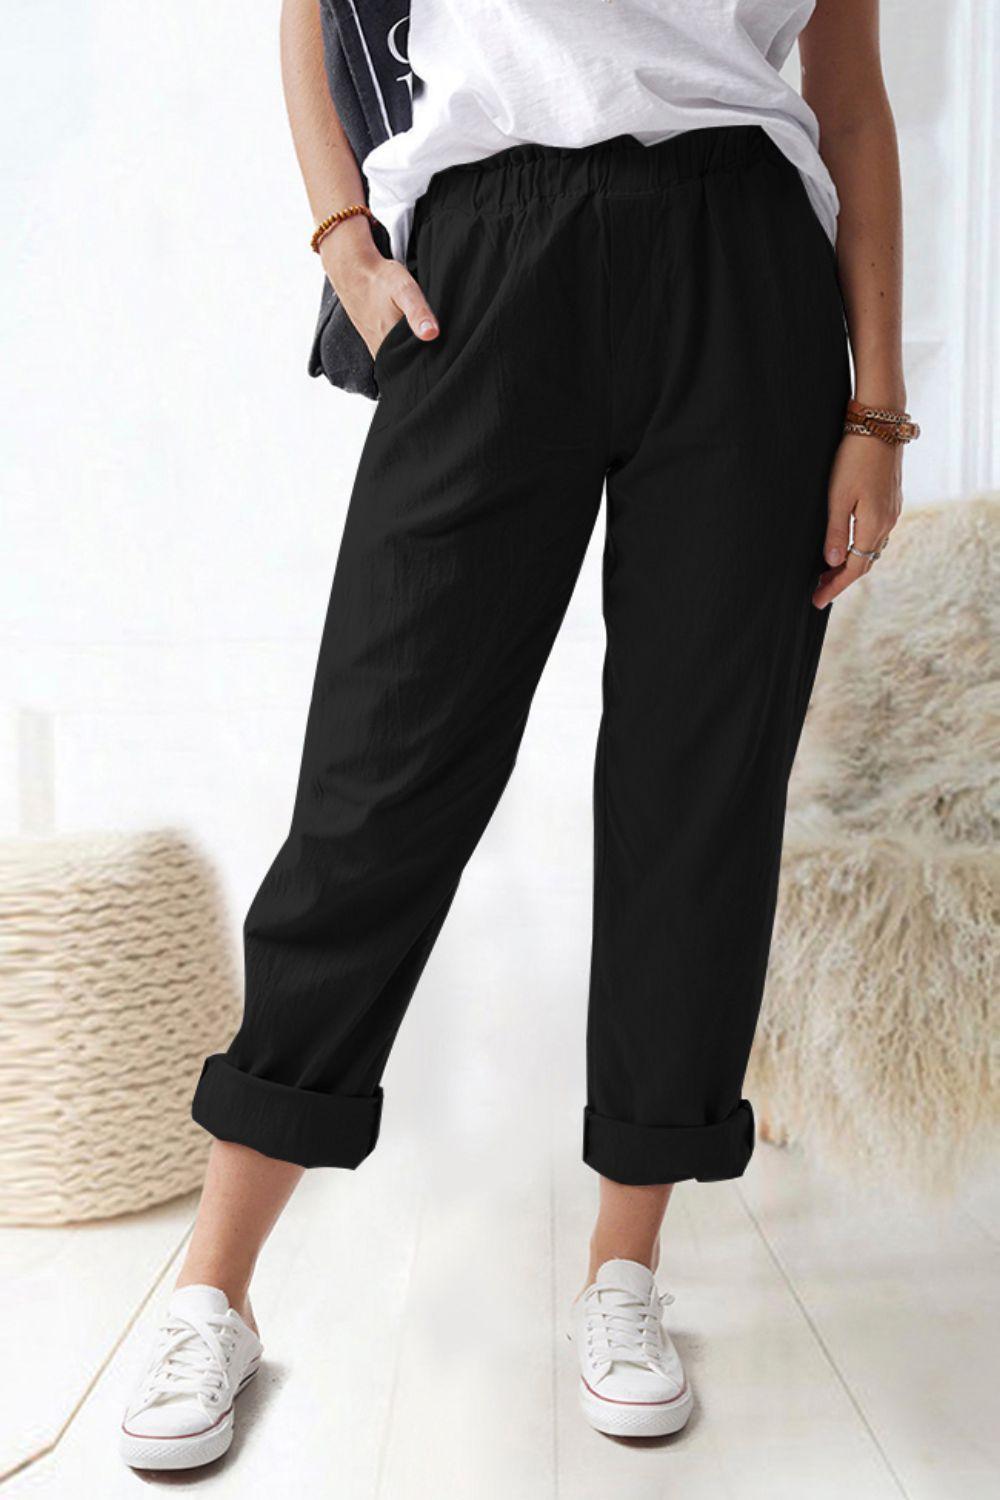 Paperbag Waist Pull-On Pants with Pockets - BELLATRENDZ